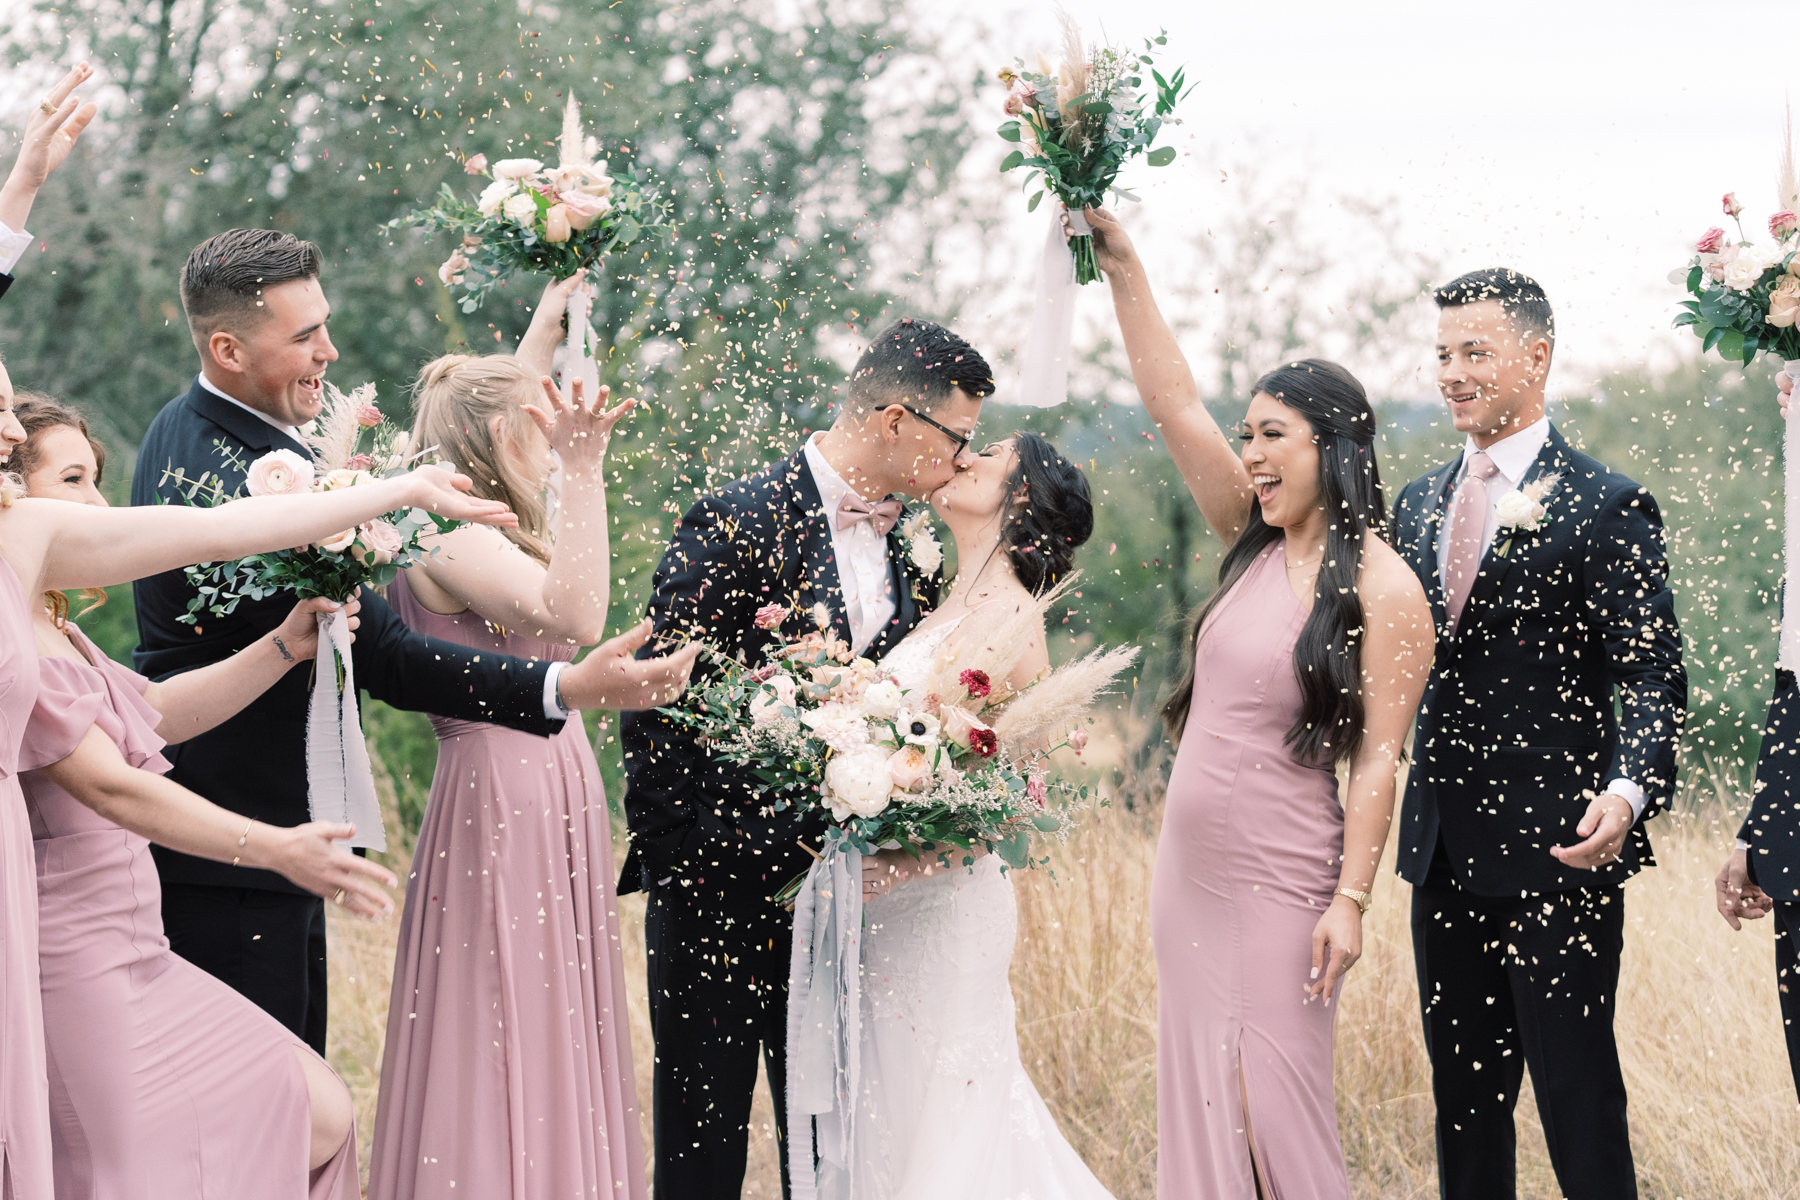 This gorgeous wedding day at Vista West Ranch features a perfect fall pallet, gorgeous florals from Whim Hospitality, and the sweetest couple!